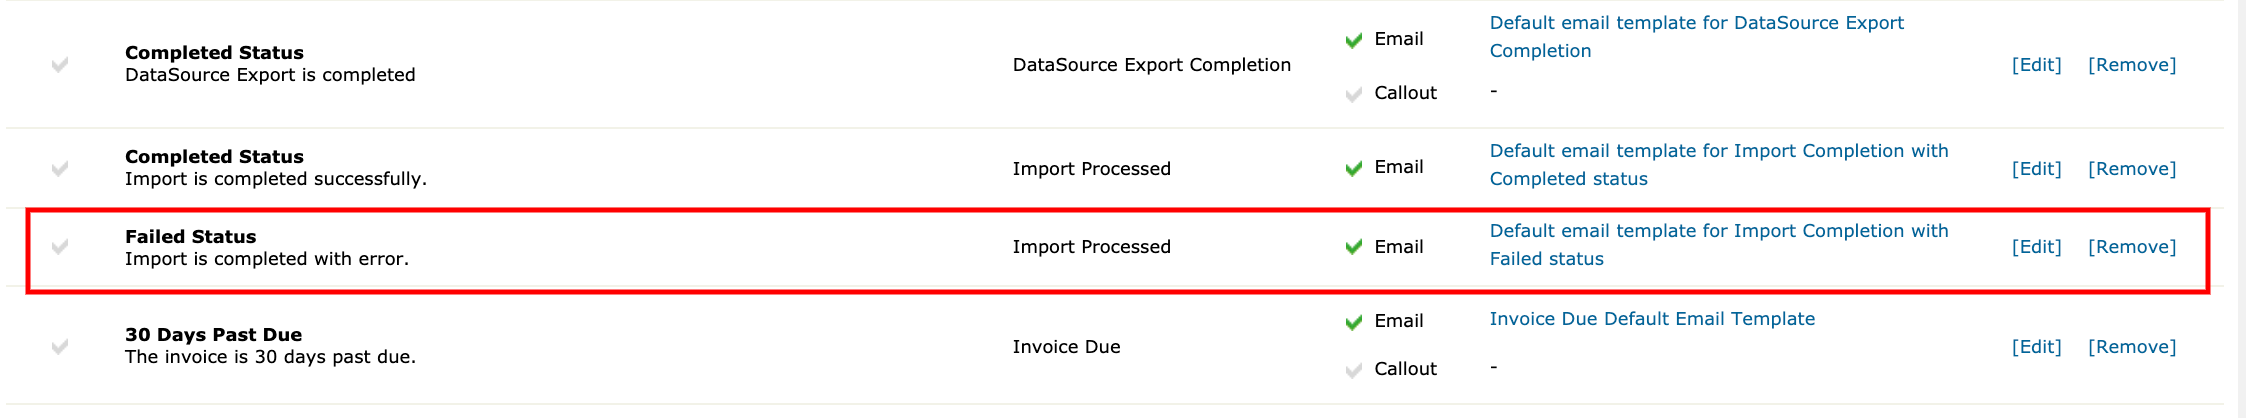 Usage-failed import notification-edit.png